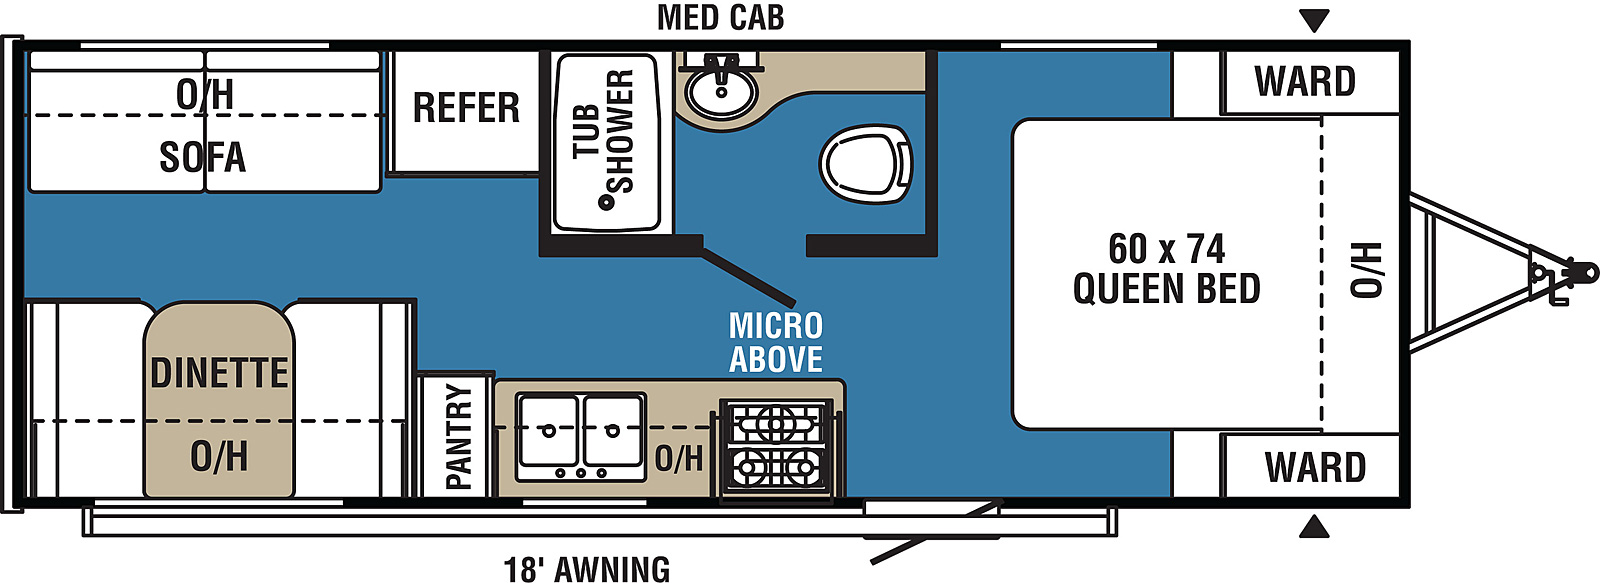 Clipper Ultra-Lite 21RD floorplan. The 21RD has no slide outs and one entry door.